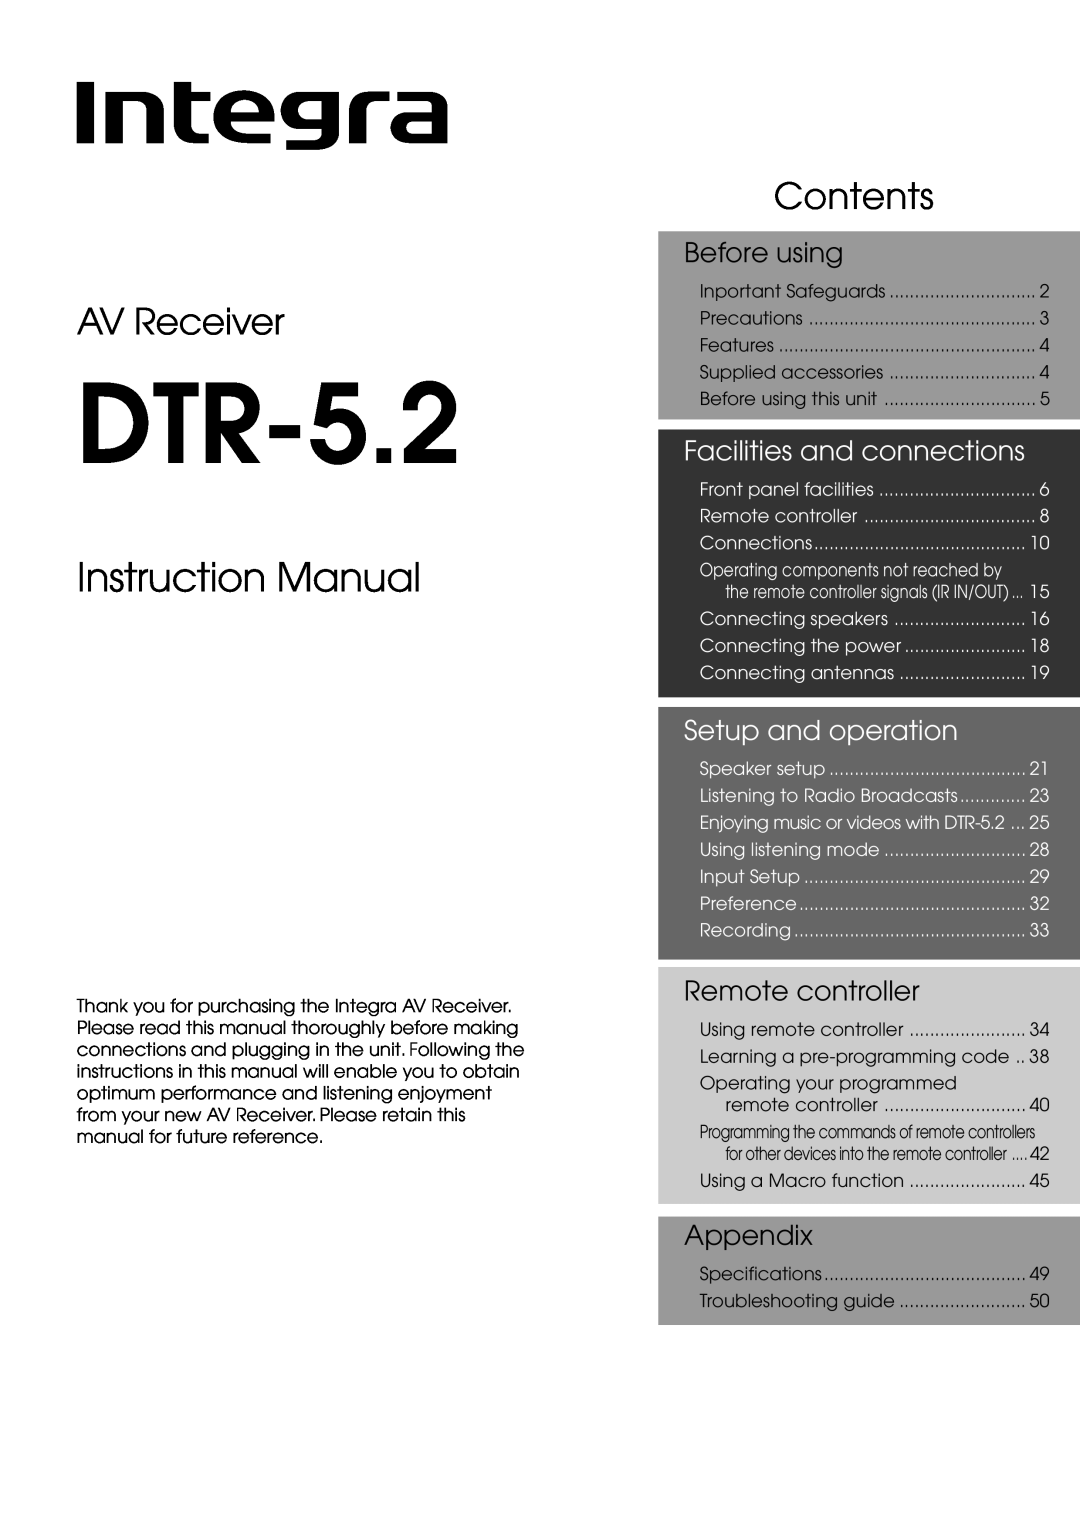 Integra DTR-5.2 appendix AV Receiver, Contents, Before using, Facilities and connections, Setup and operation, Appendix 